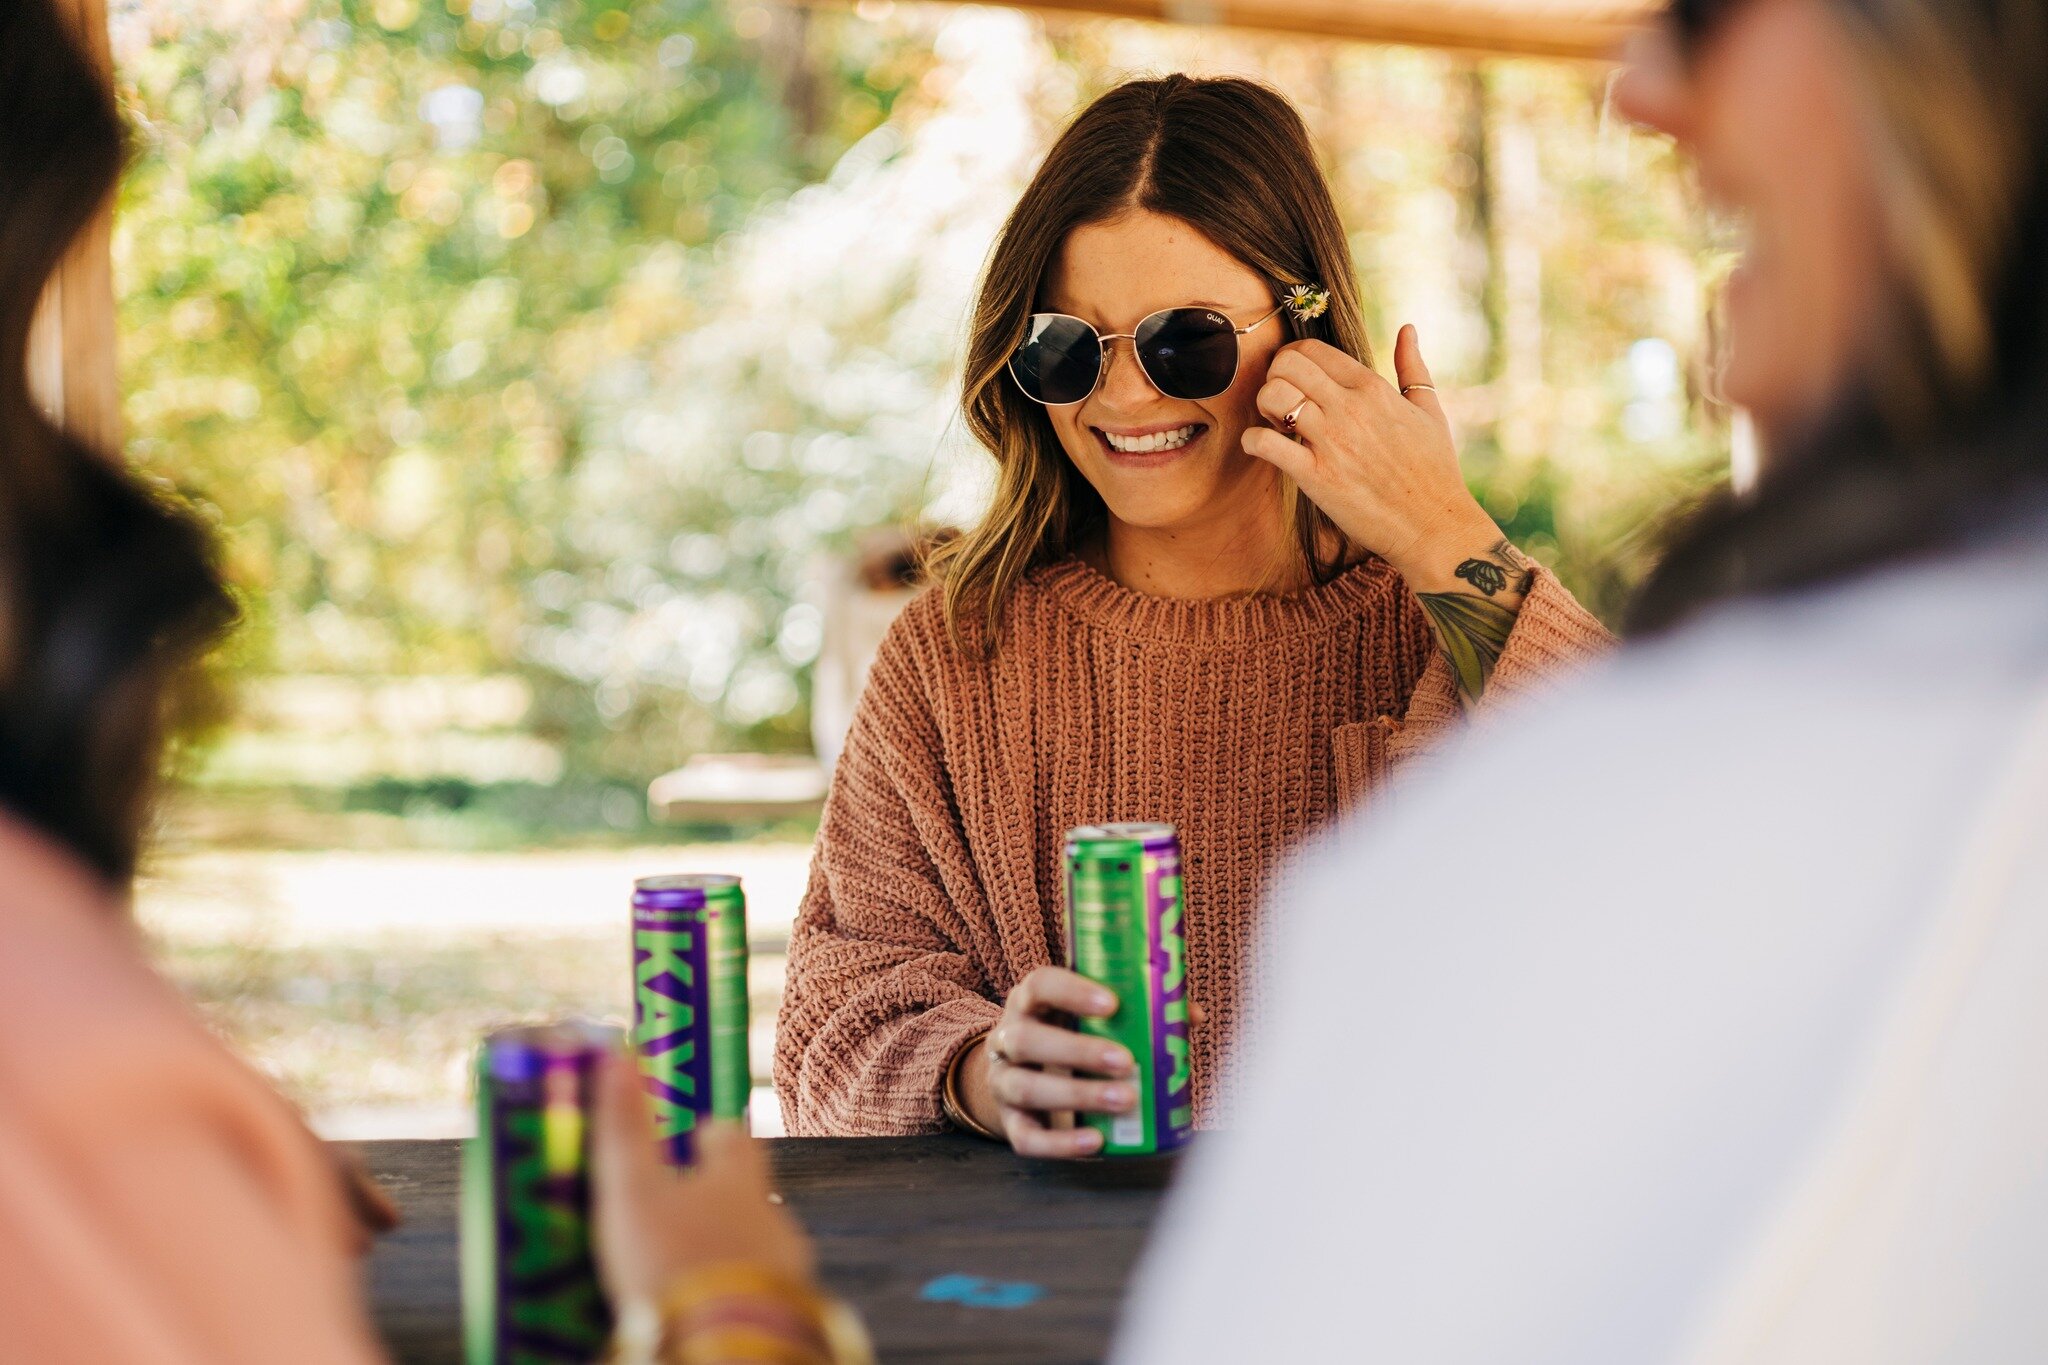 You can't help but be happy while drinking Kaya with friends.🌿✨ #DrinkKaya #AlcoholFree #Wellness #FueledByTHC #SoberCurious #CannaCurious